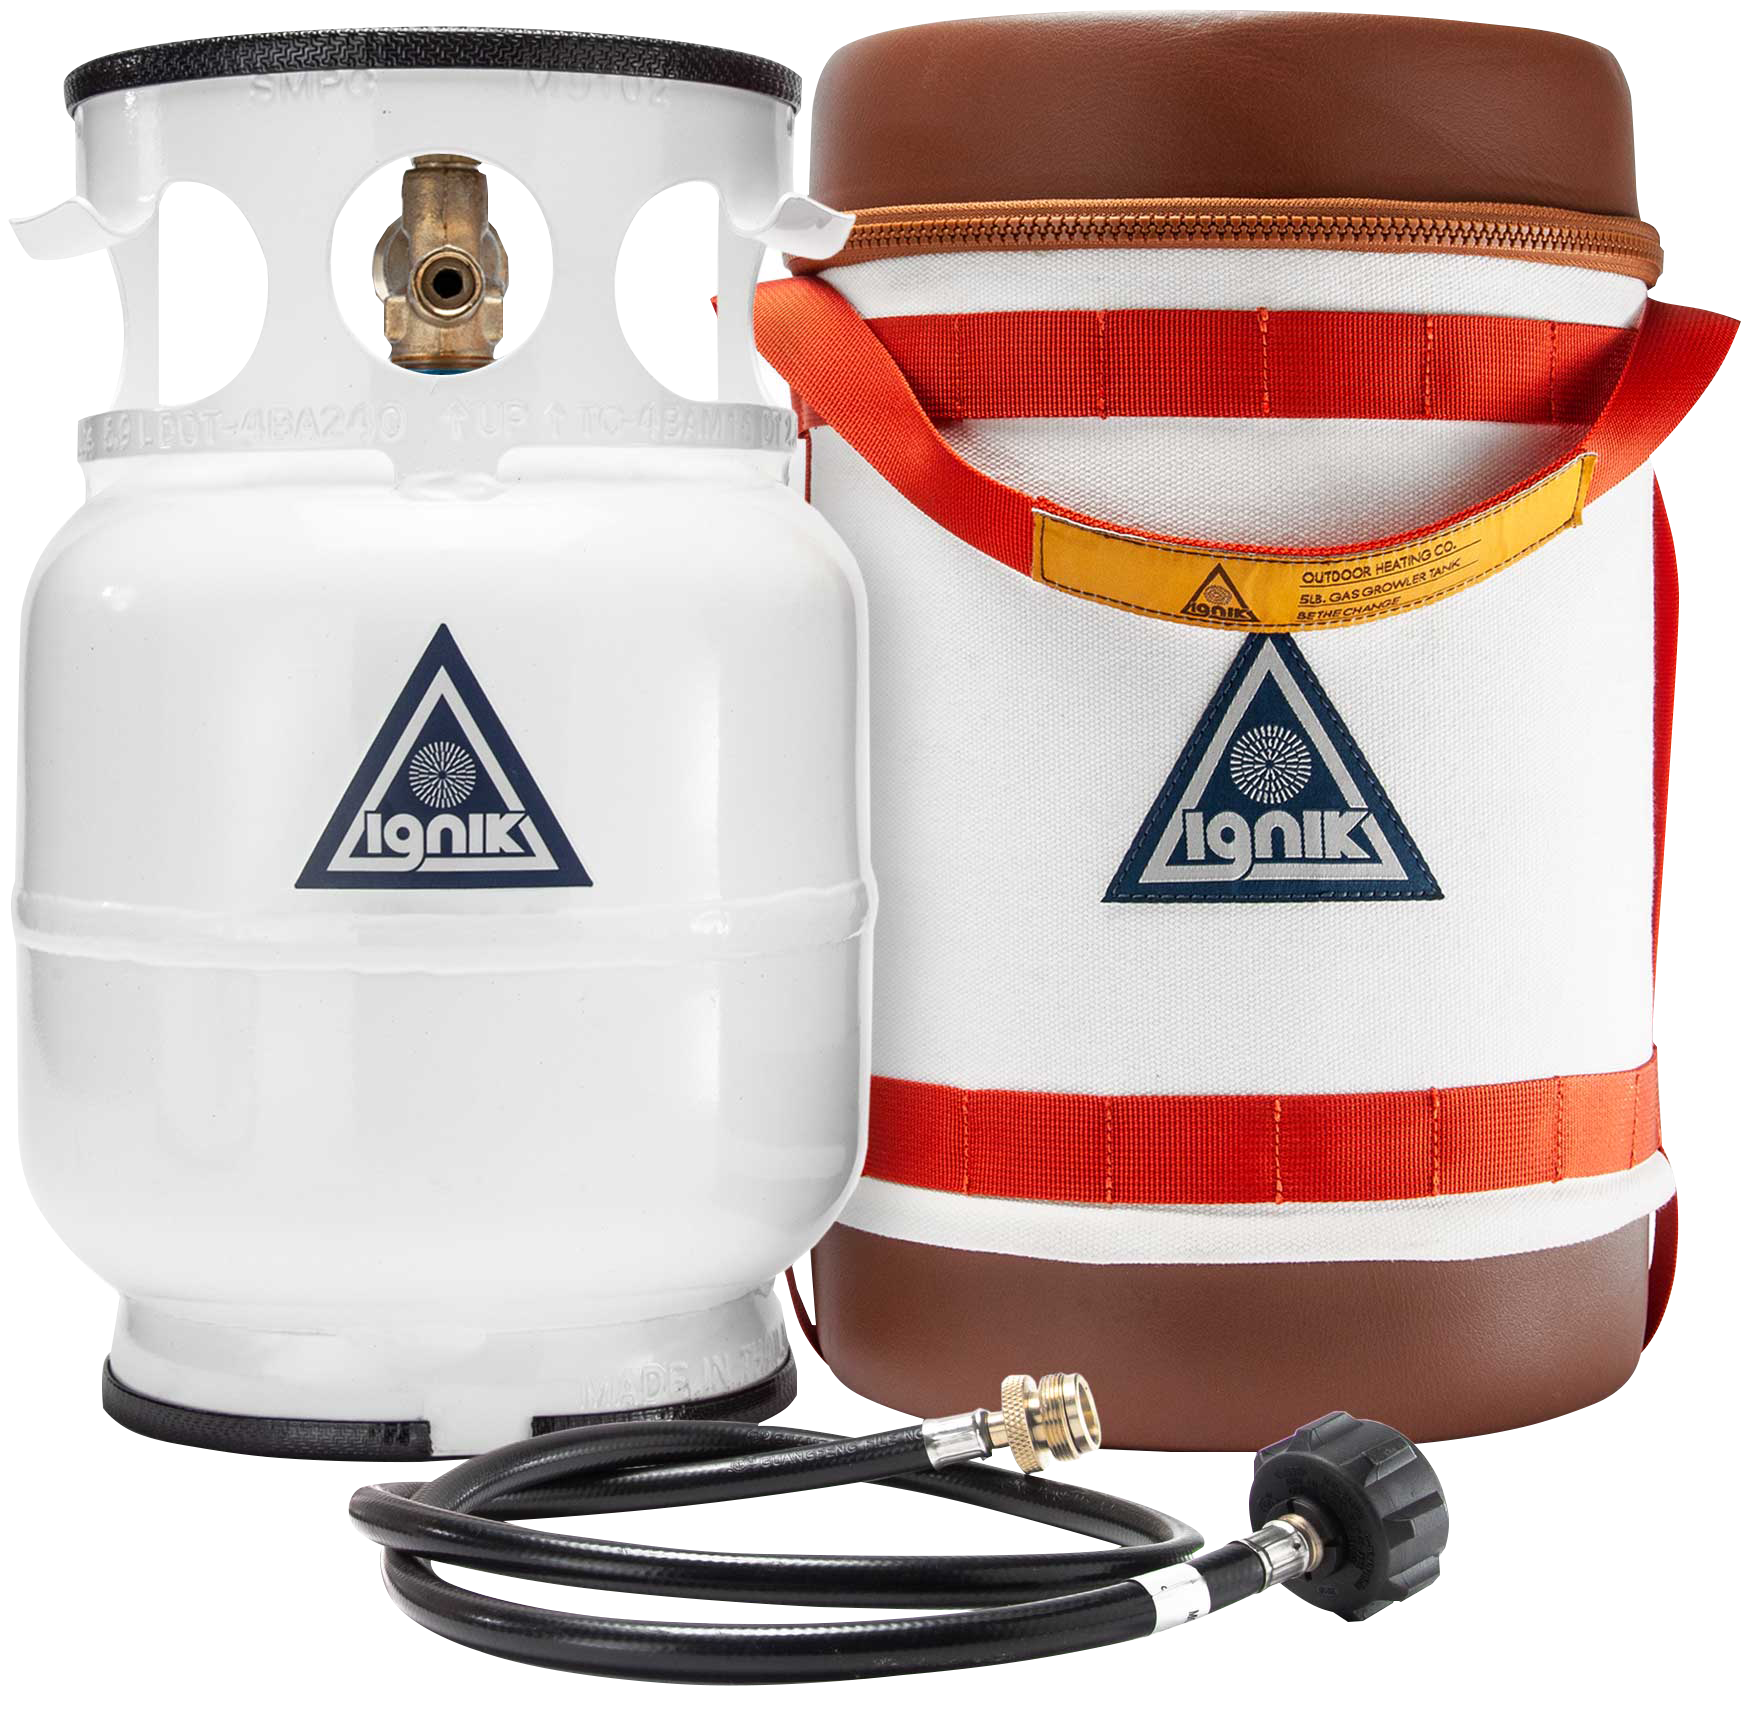 Coleman Propane Camping Gas Cylinder- 4 Pack 332406